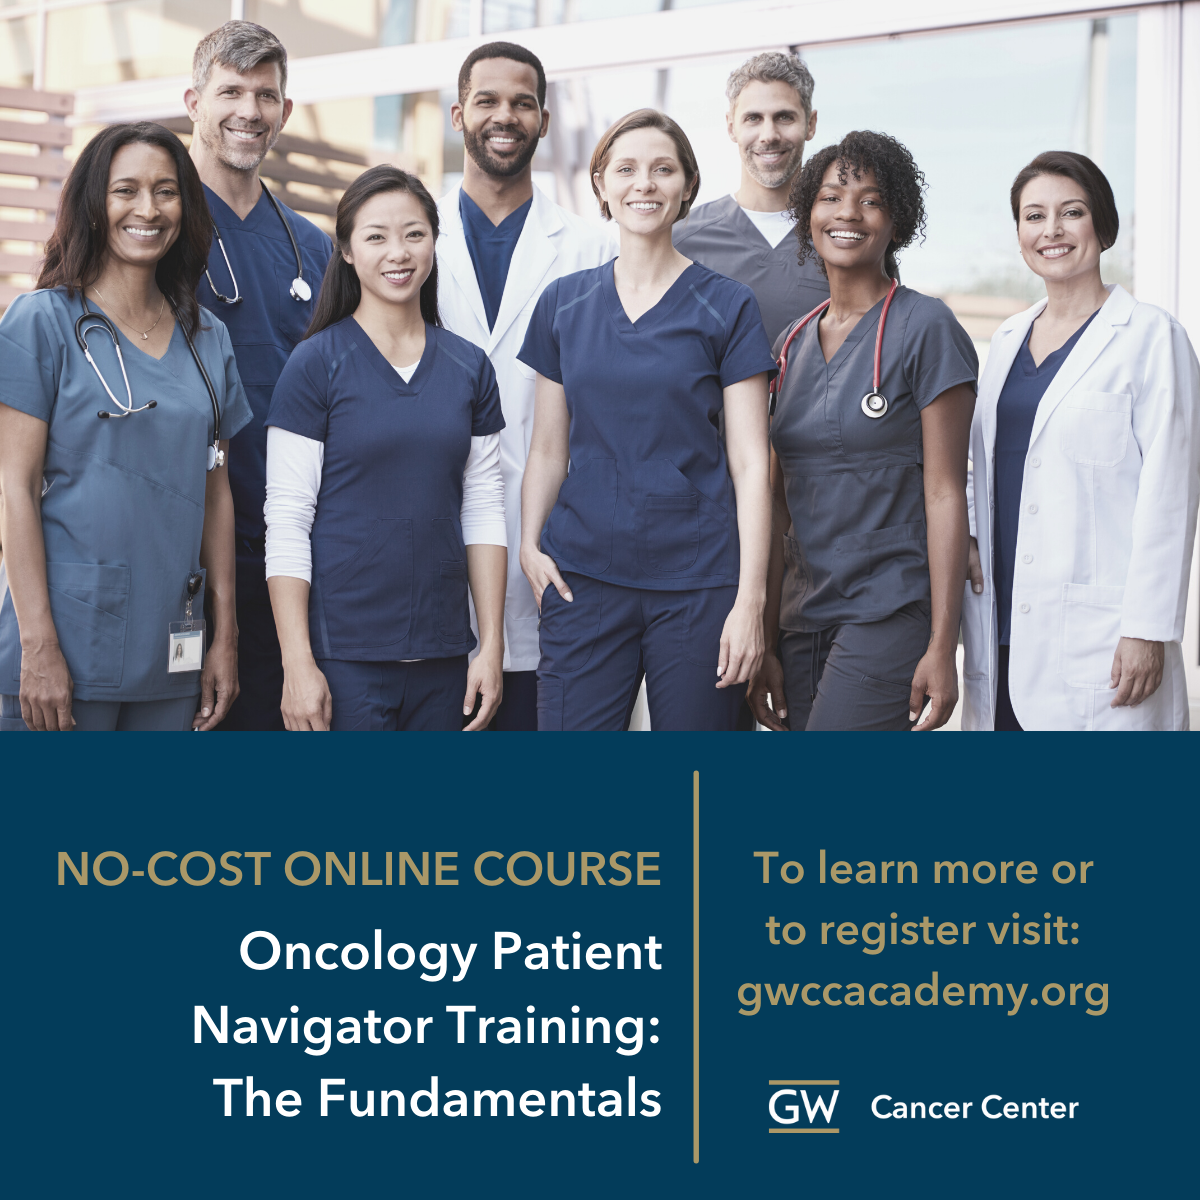 Image of group of clinicians smiling at camera. Text below reads Oncology Patient Navigator Training: The Fundamentals 